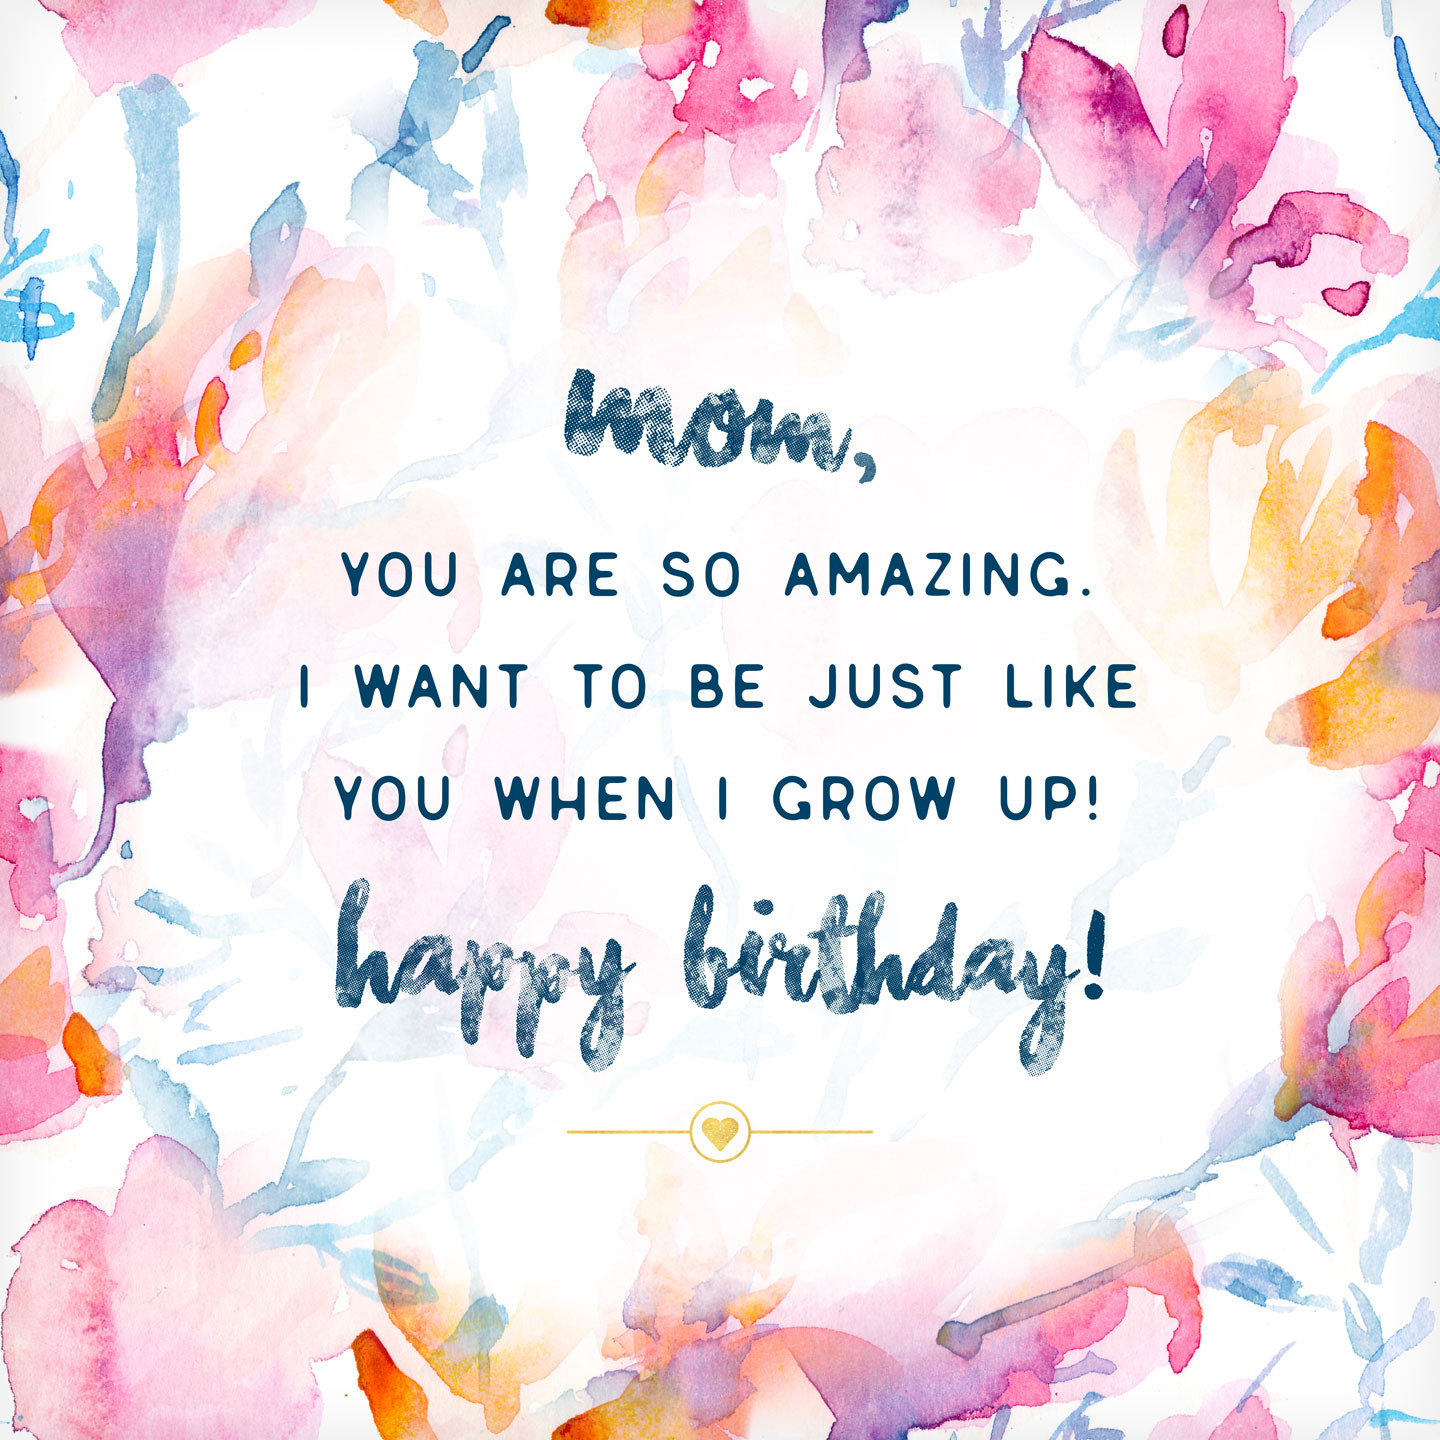 Birthday Wishes Card
 What to Write in a Birthday Card 48 Birthday Messages and